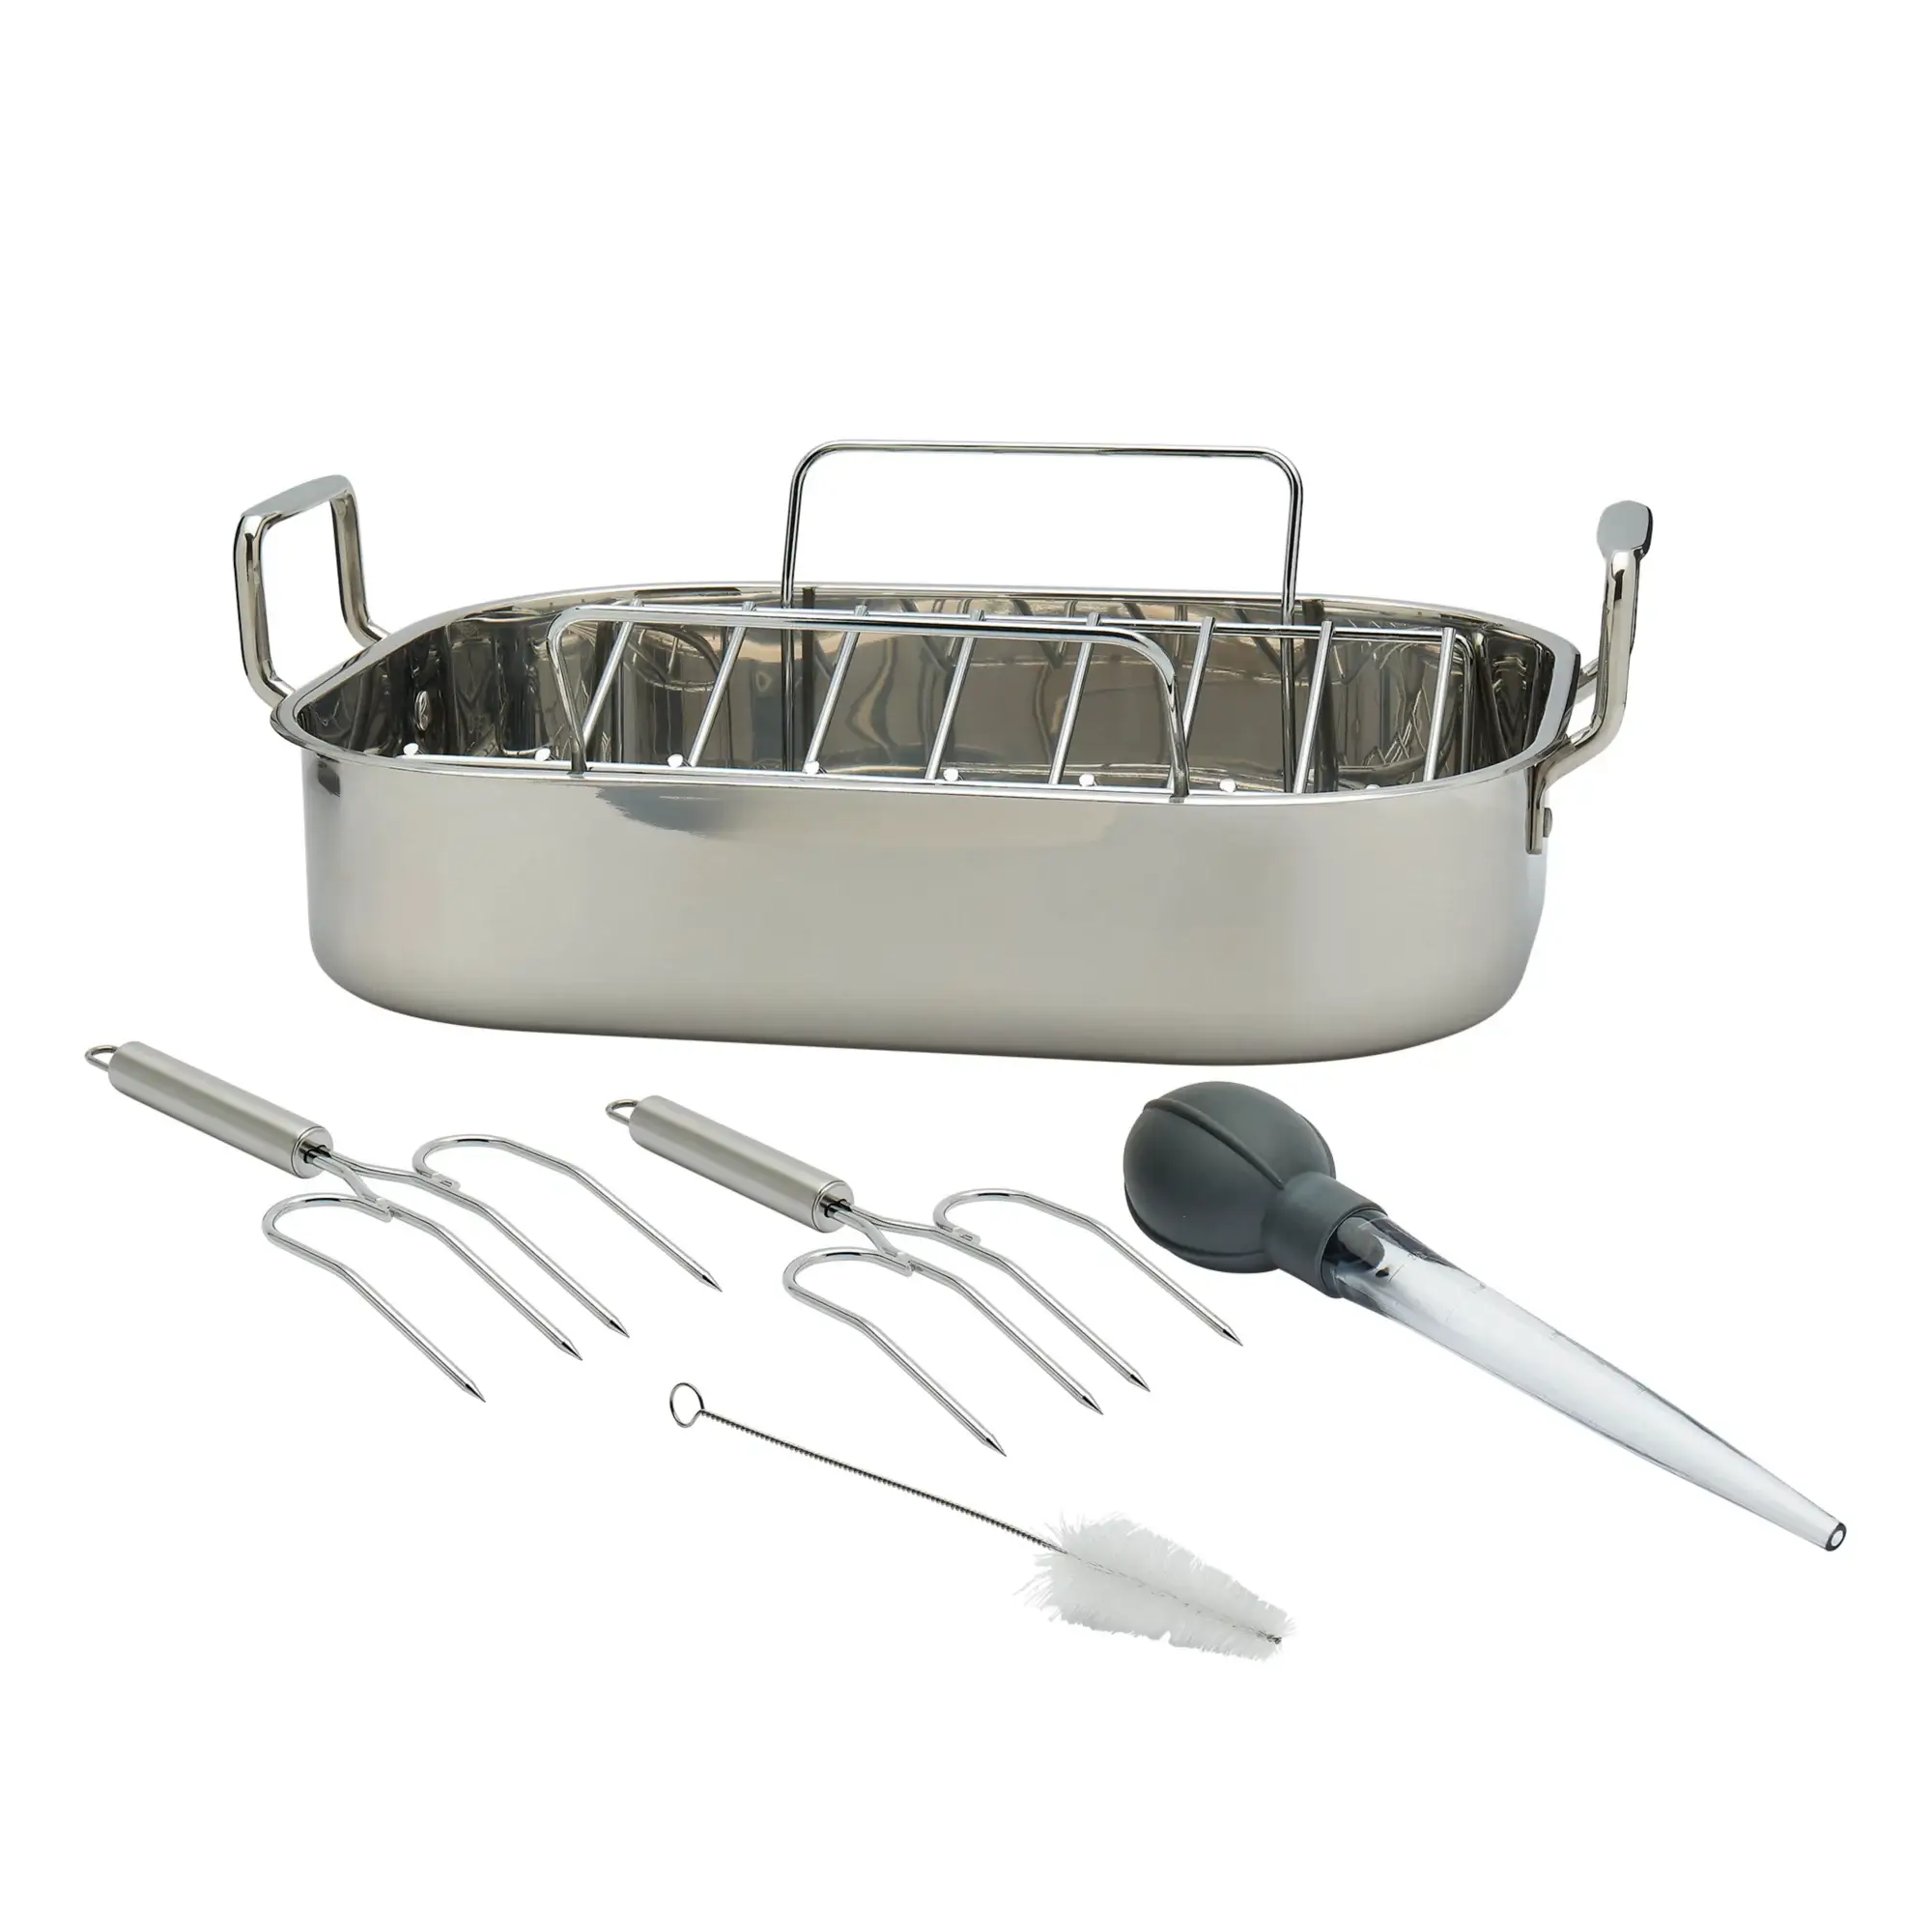 A steel roasting pan with rack, baster and holders